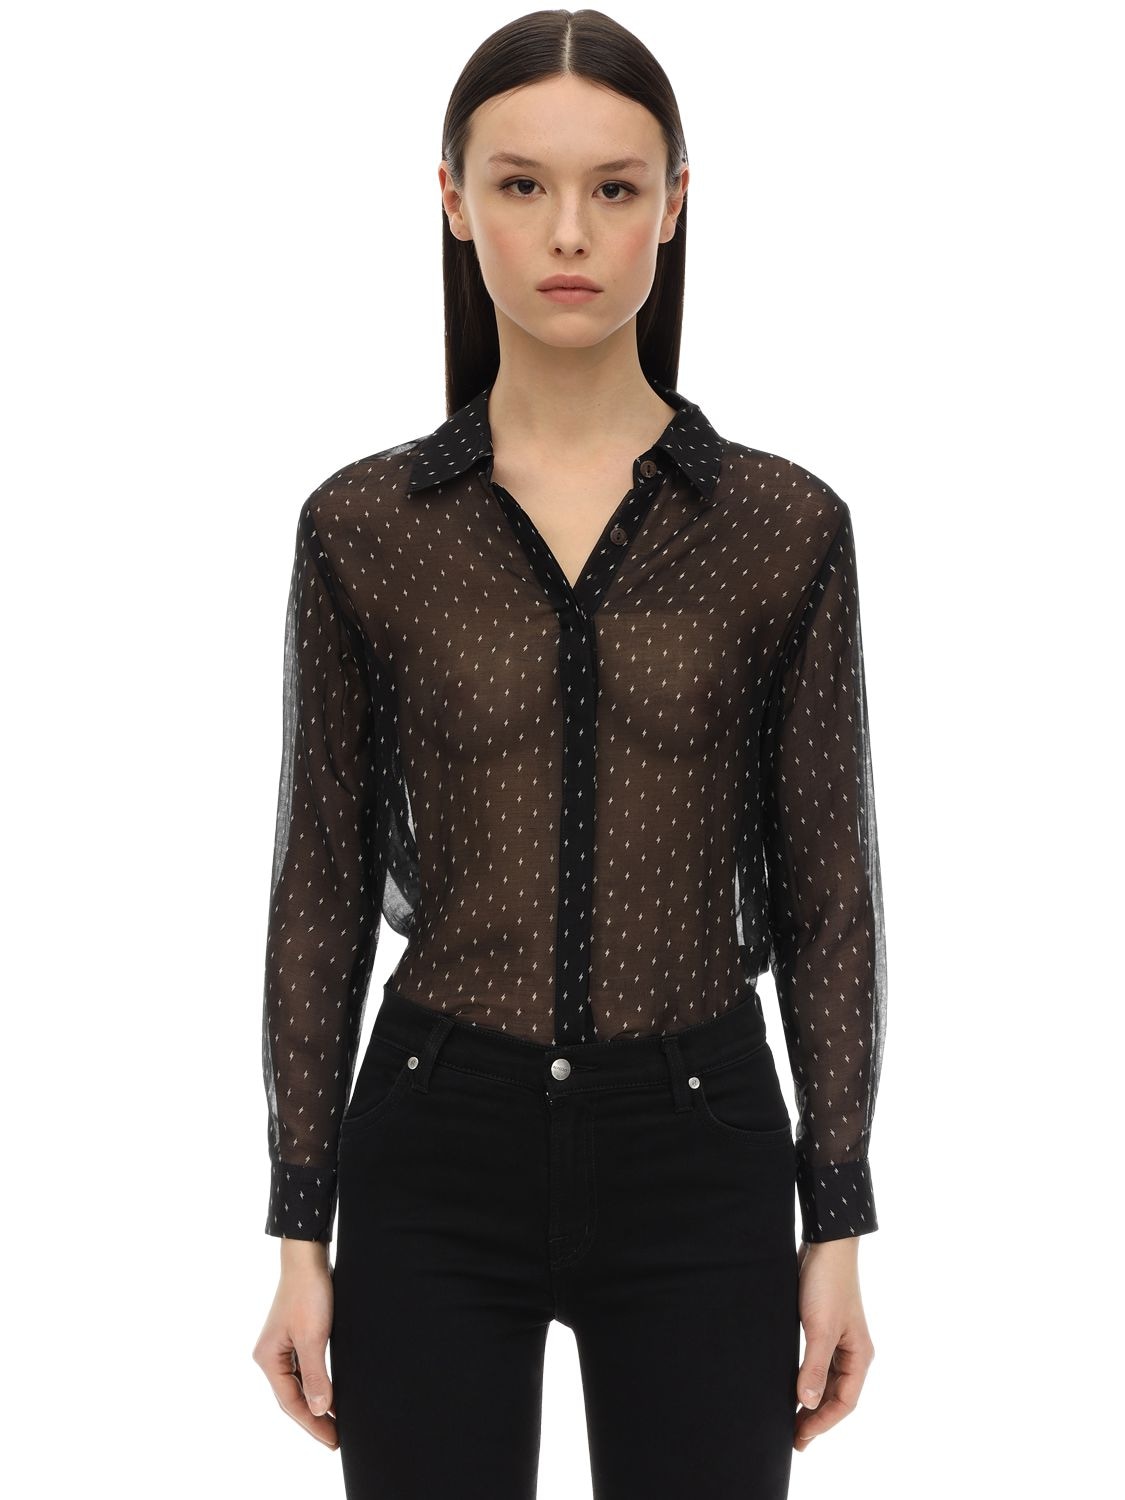 The People Vs Emission Pm Sheer Rayon Shirt In Black